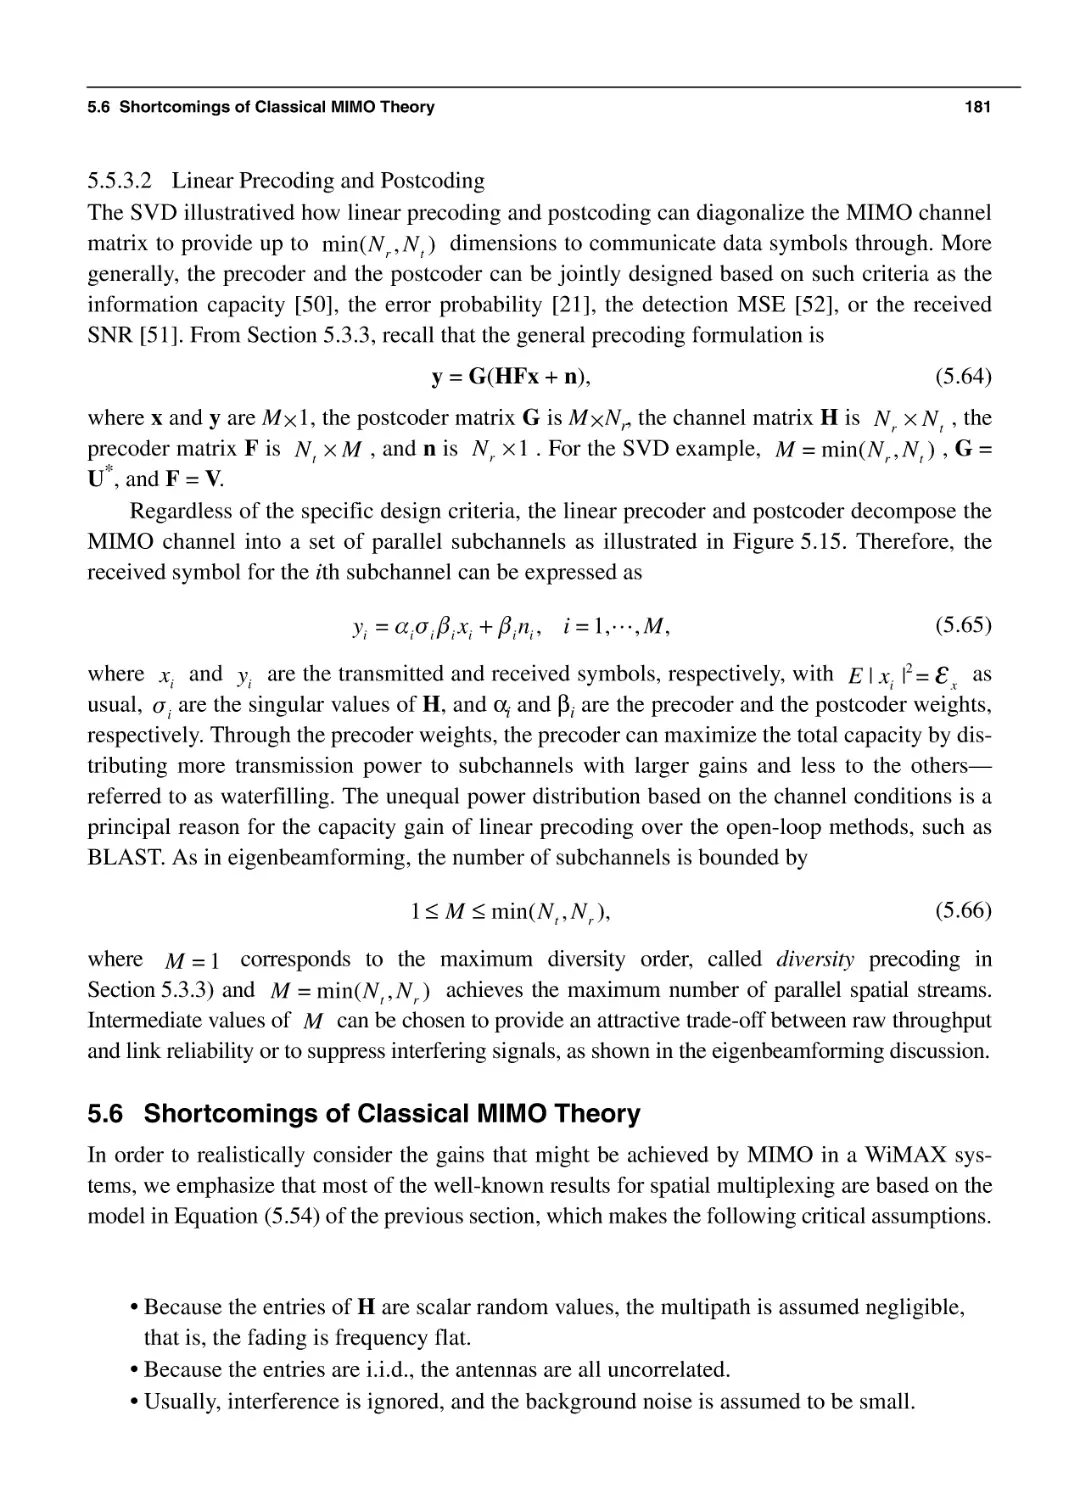 5.6 Shortcomings of Classical MIMO Theory